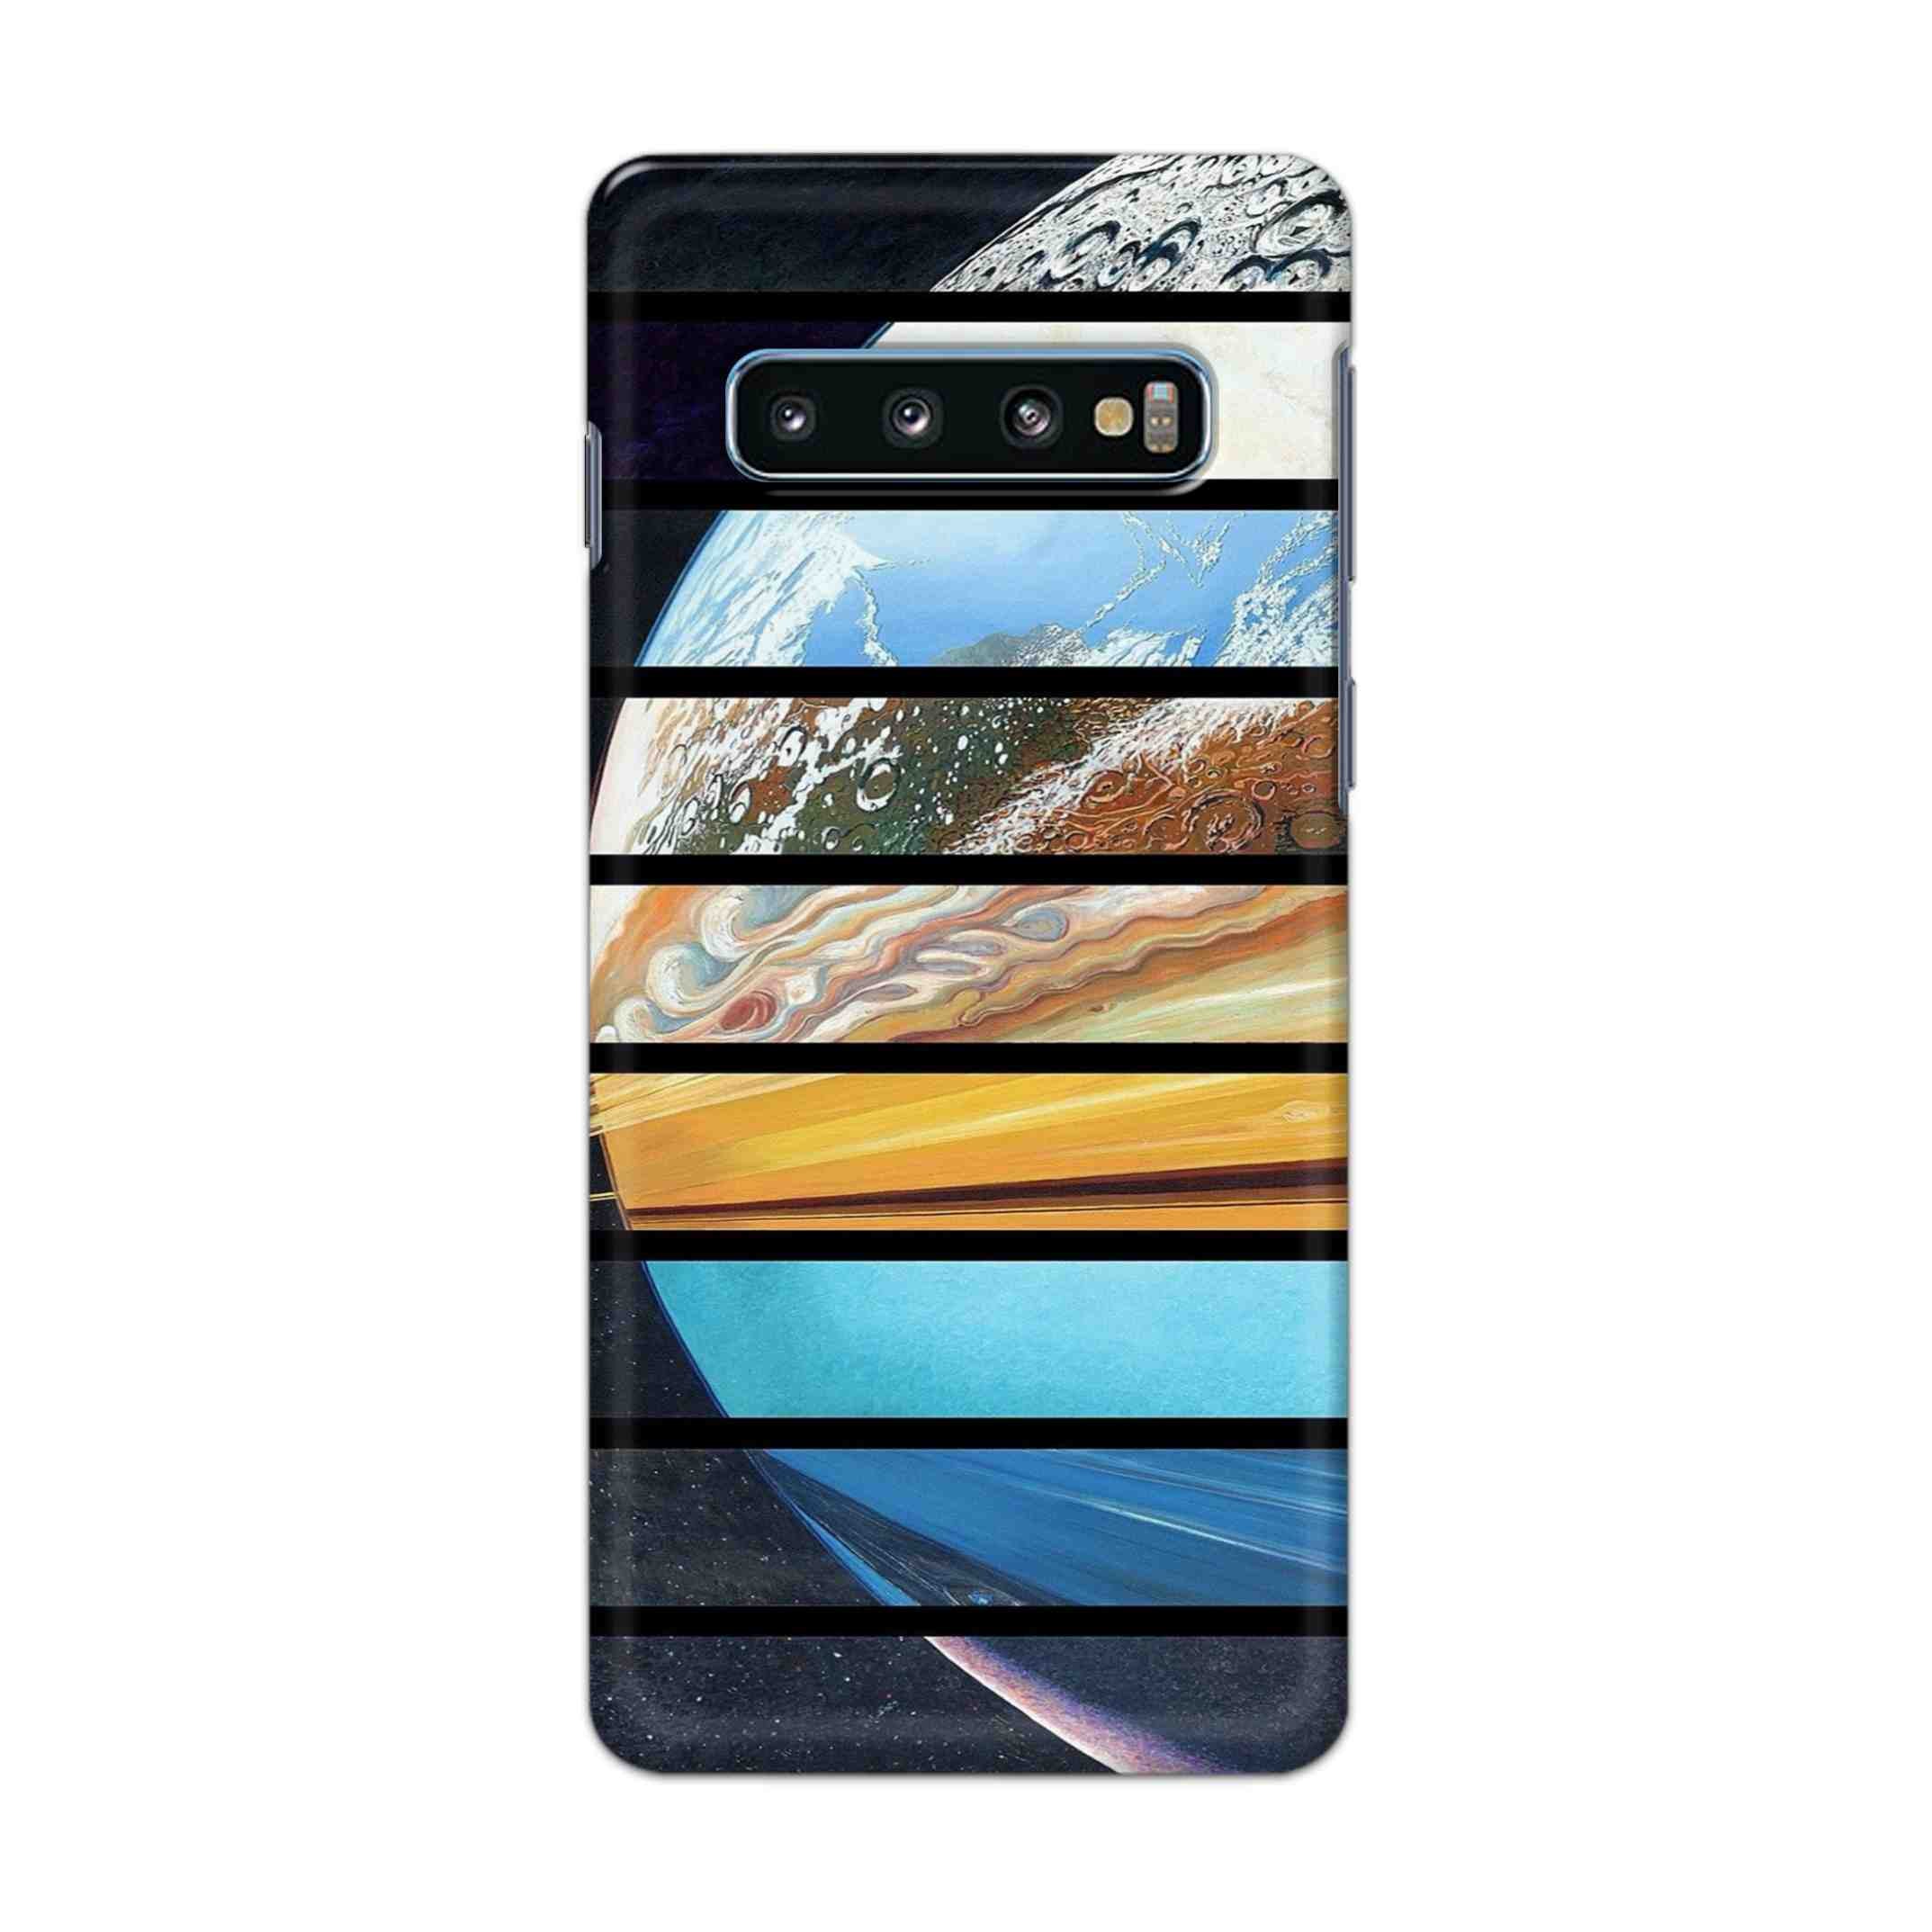 Buy Colourful Earth Hard Back Mobile Phone Case Cover For Samsung Galaxy S10 Online